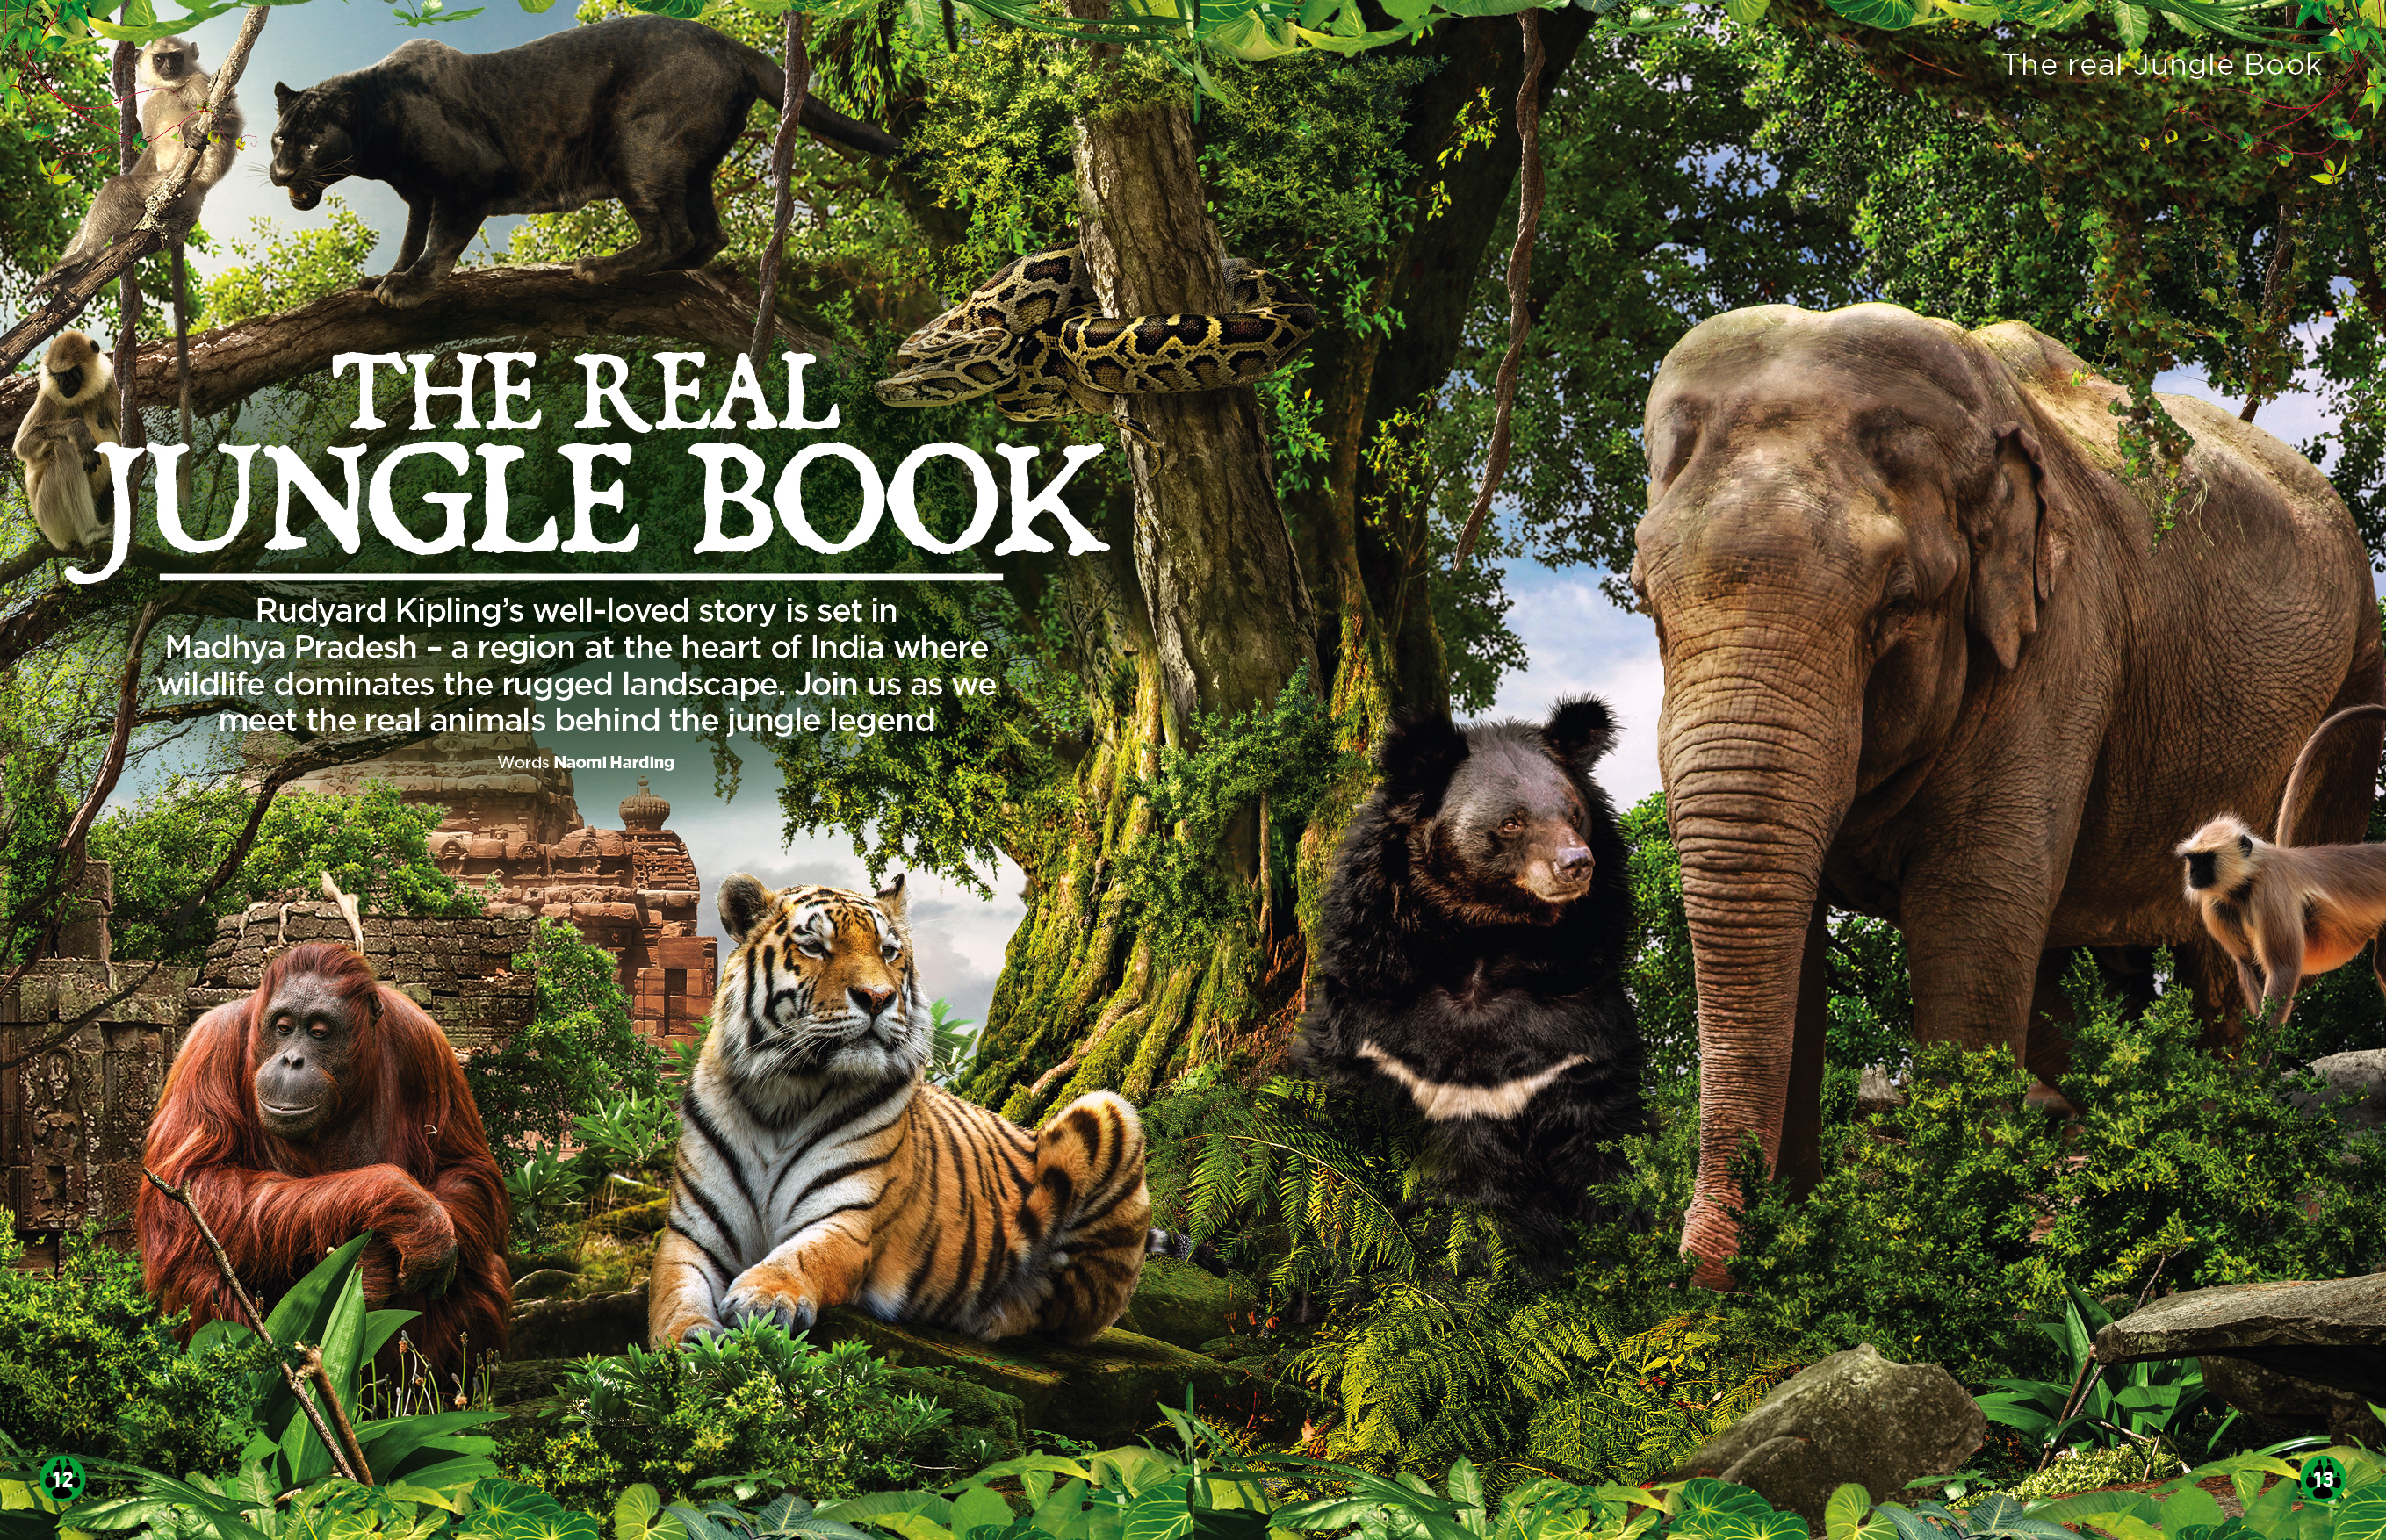 Find out what the Jungle Book animals are really like in issue 32 ...